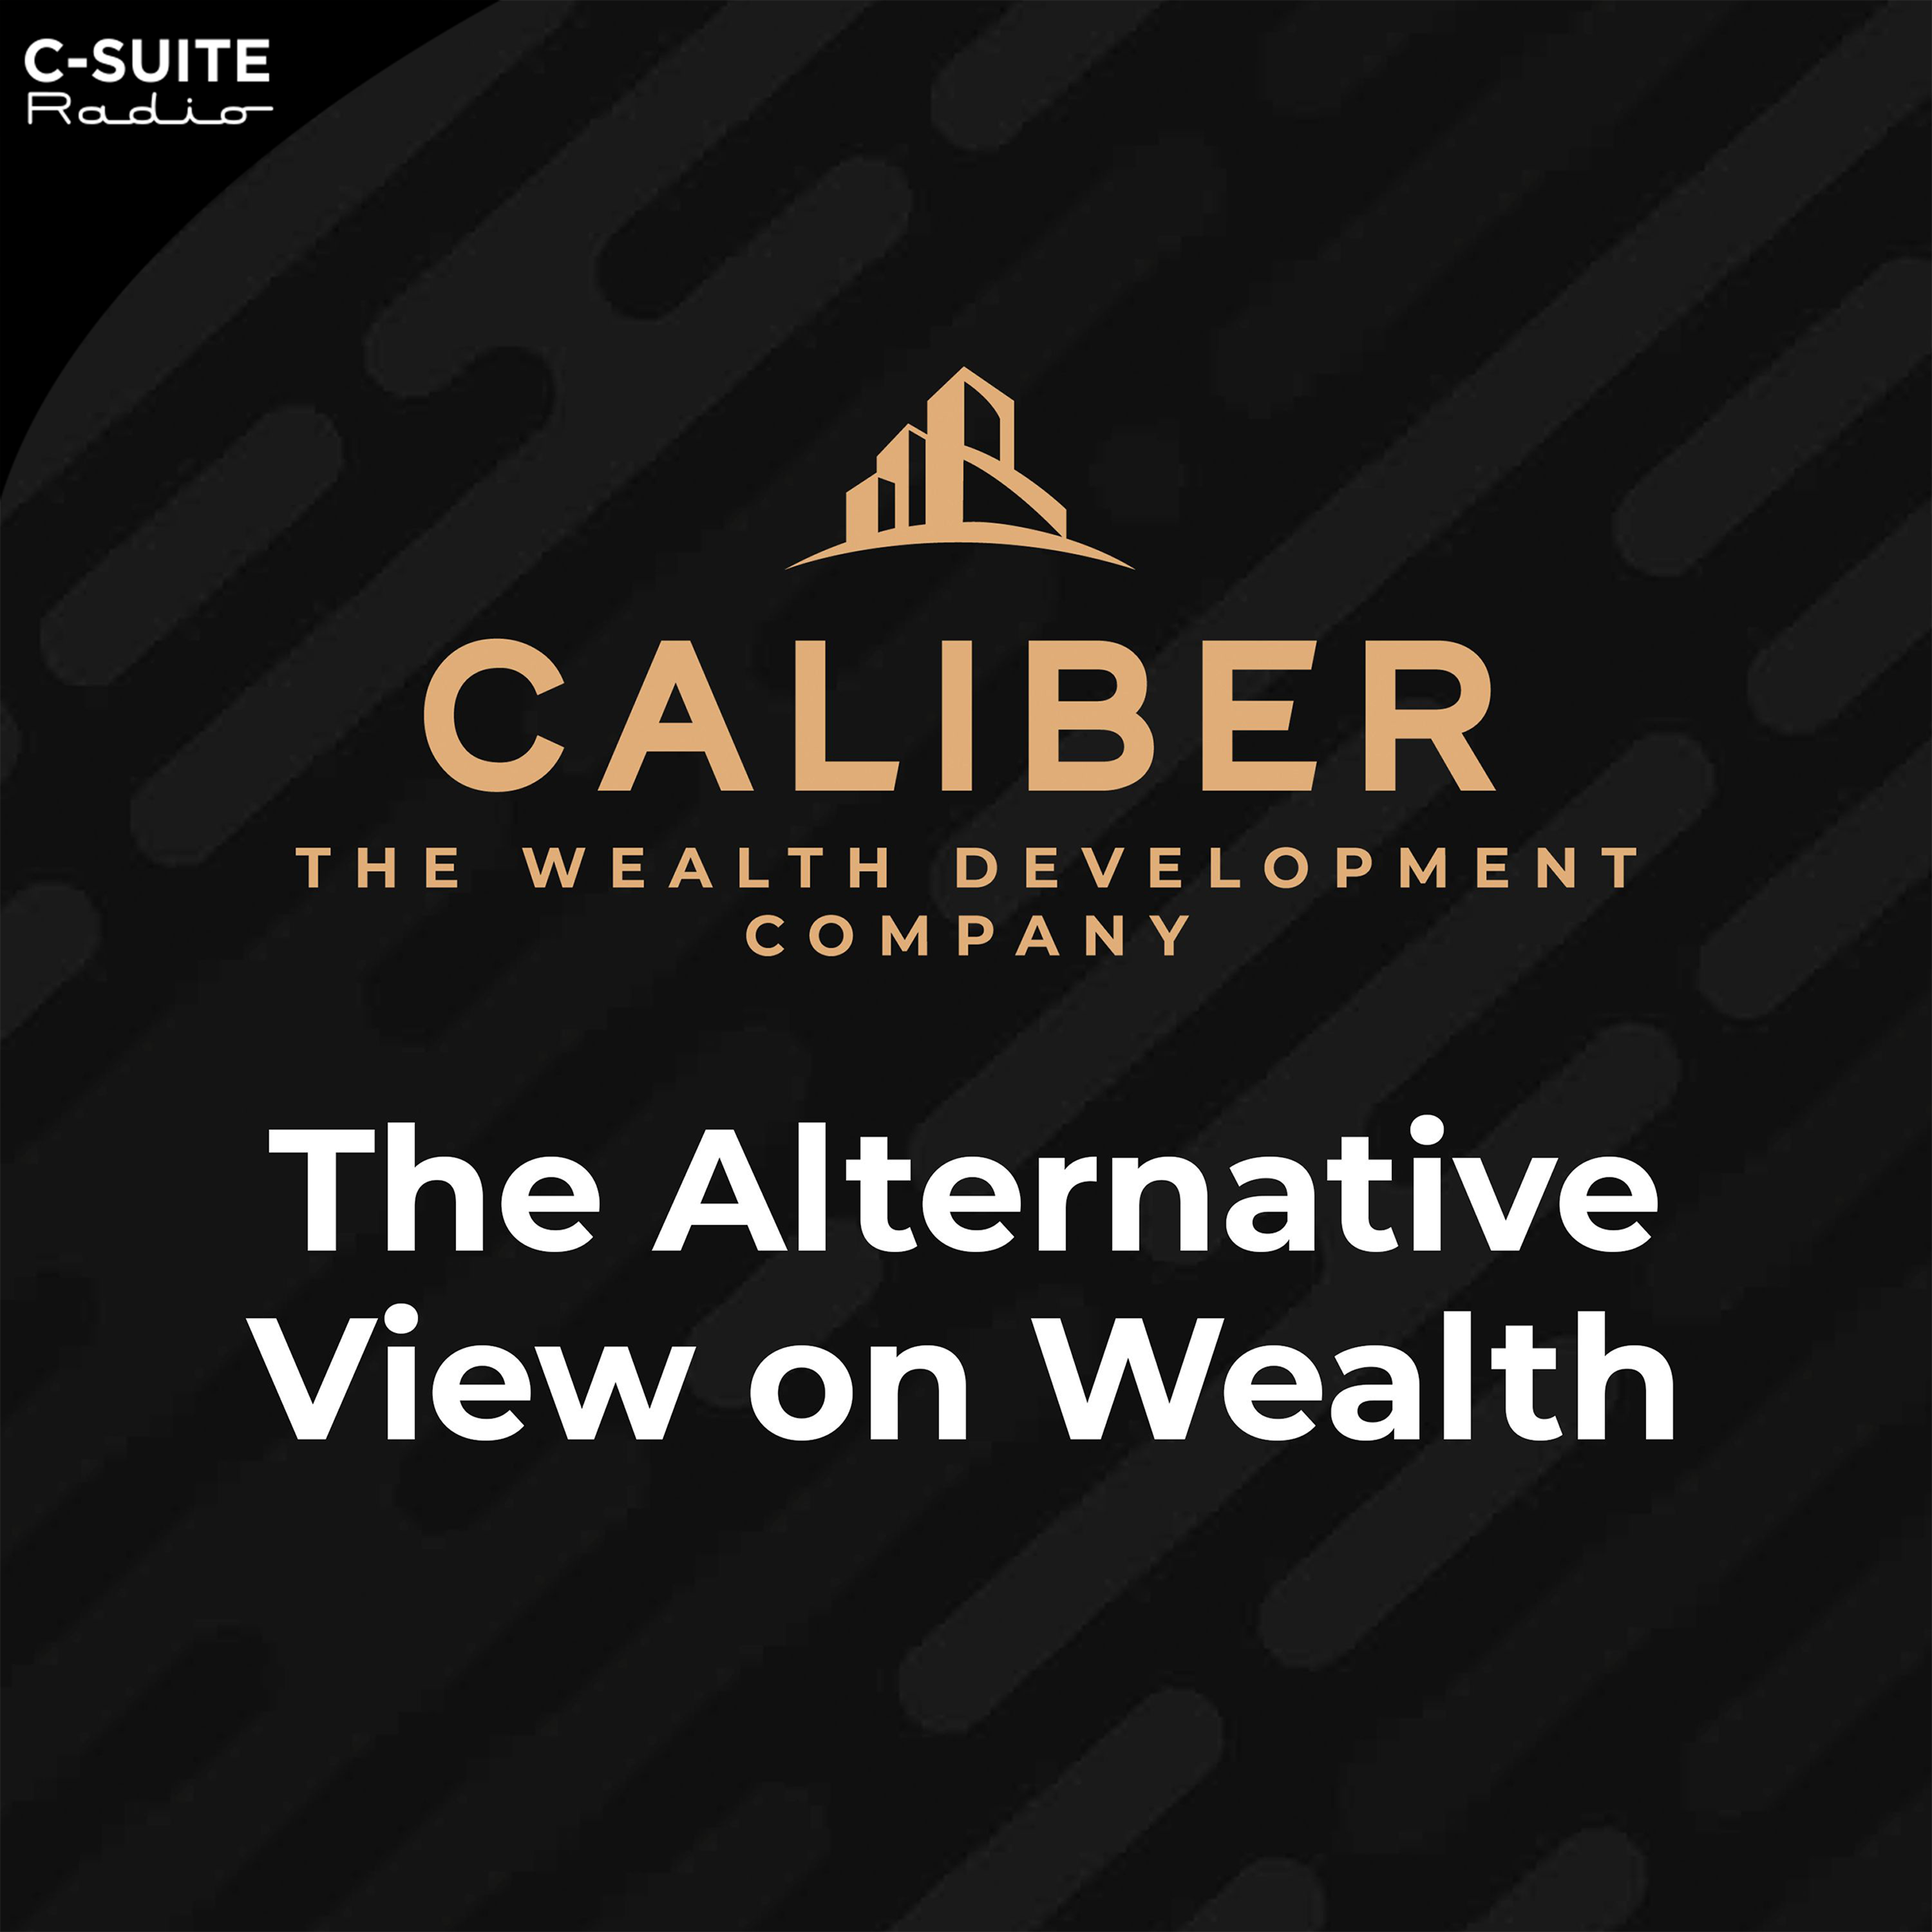 The Alternative View on Wealth